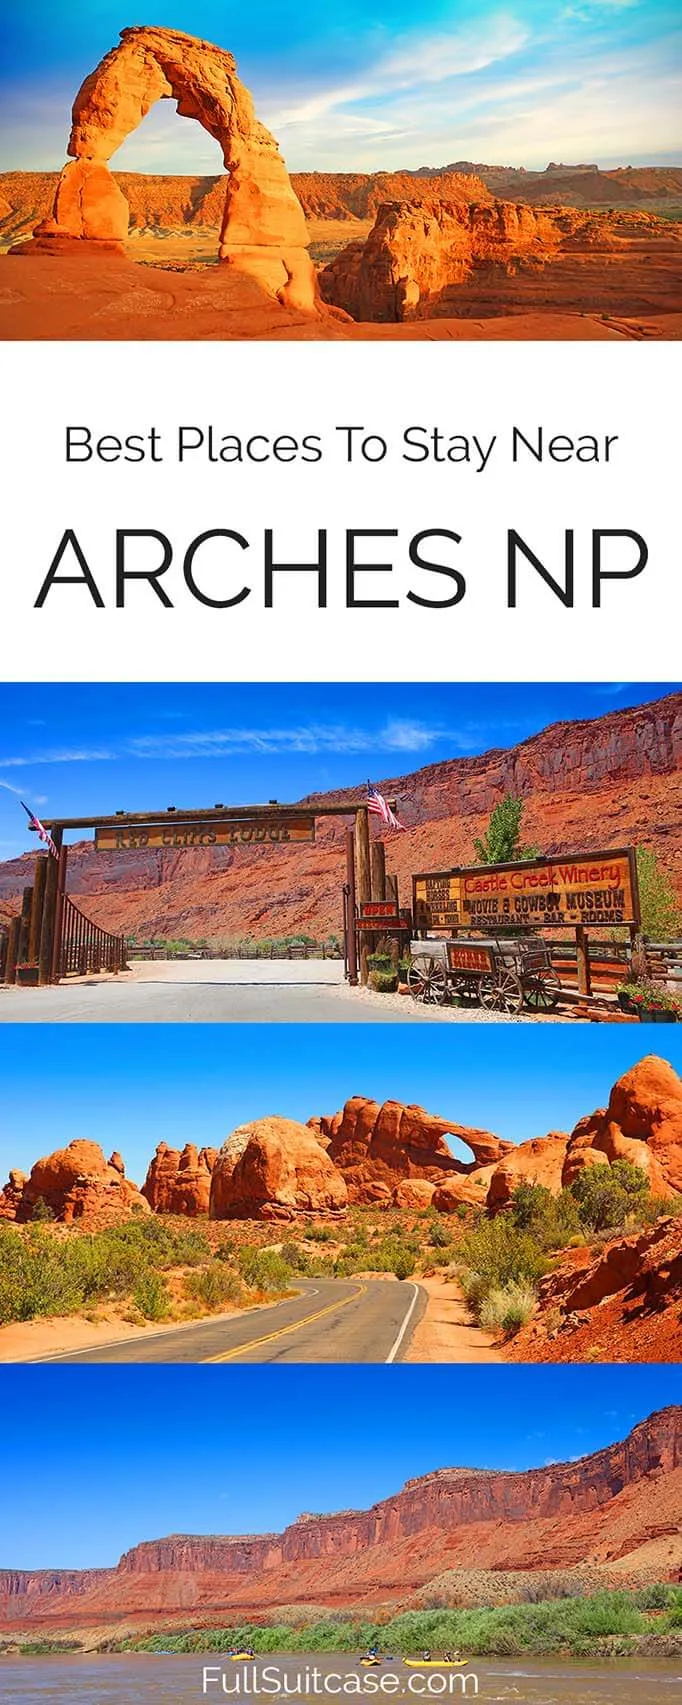 Best Moab hotels and accommodation near Arches National Park in Utah USA